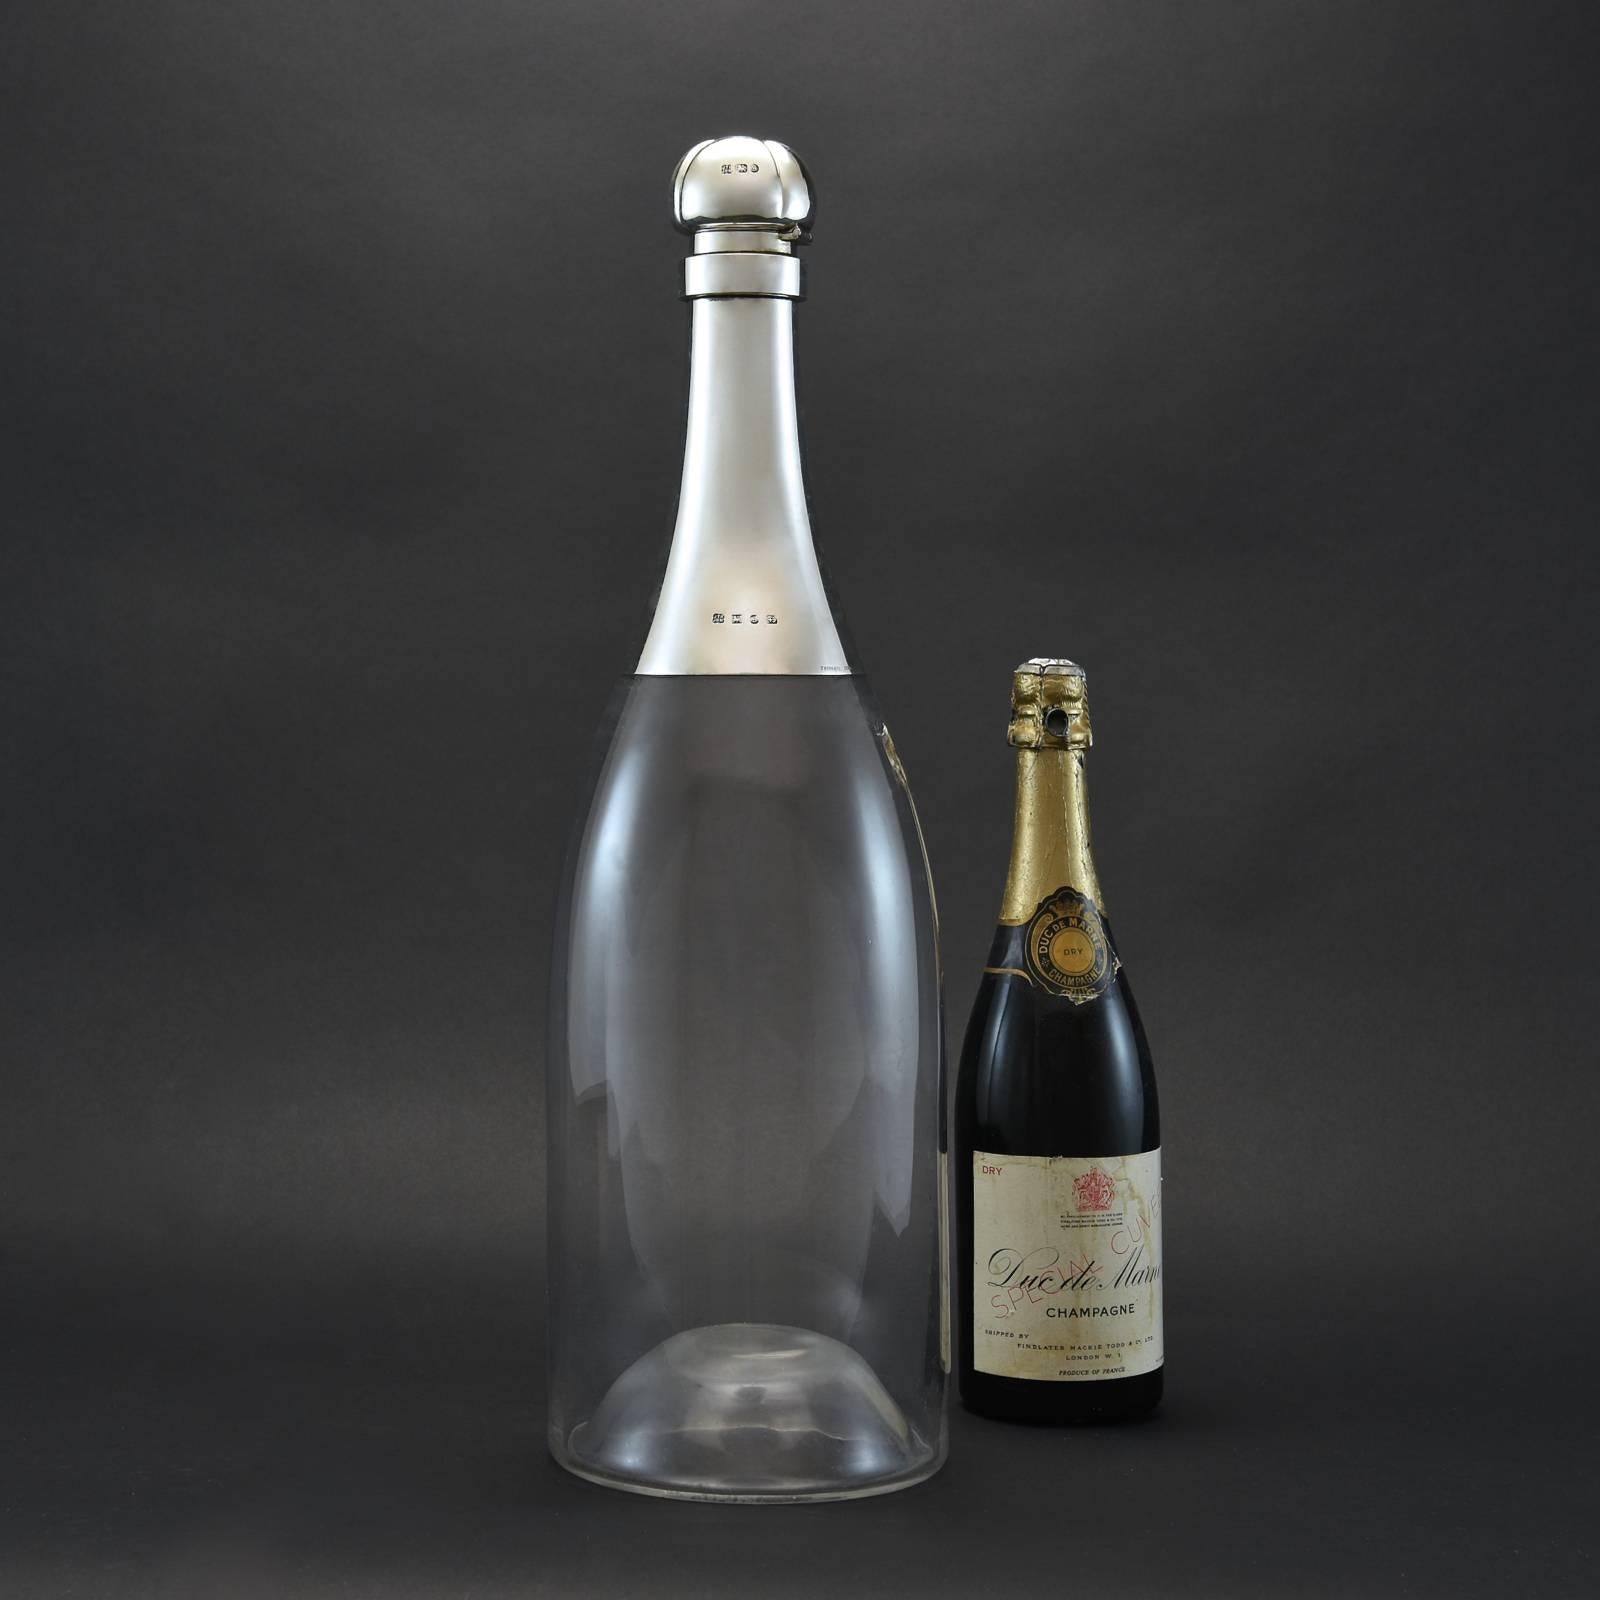 Extraordinary oversize decanter in the shape of a champagne bottle.
It has a capacity of just under 6 litres (thats more than 7 bottles of wine!). 
The Sterling silver neck and hinged stopper have hallmarks for the year 1892 and makers marks for